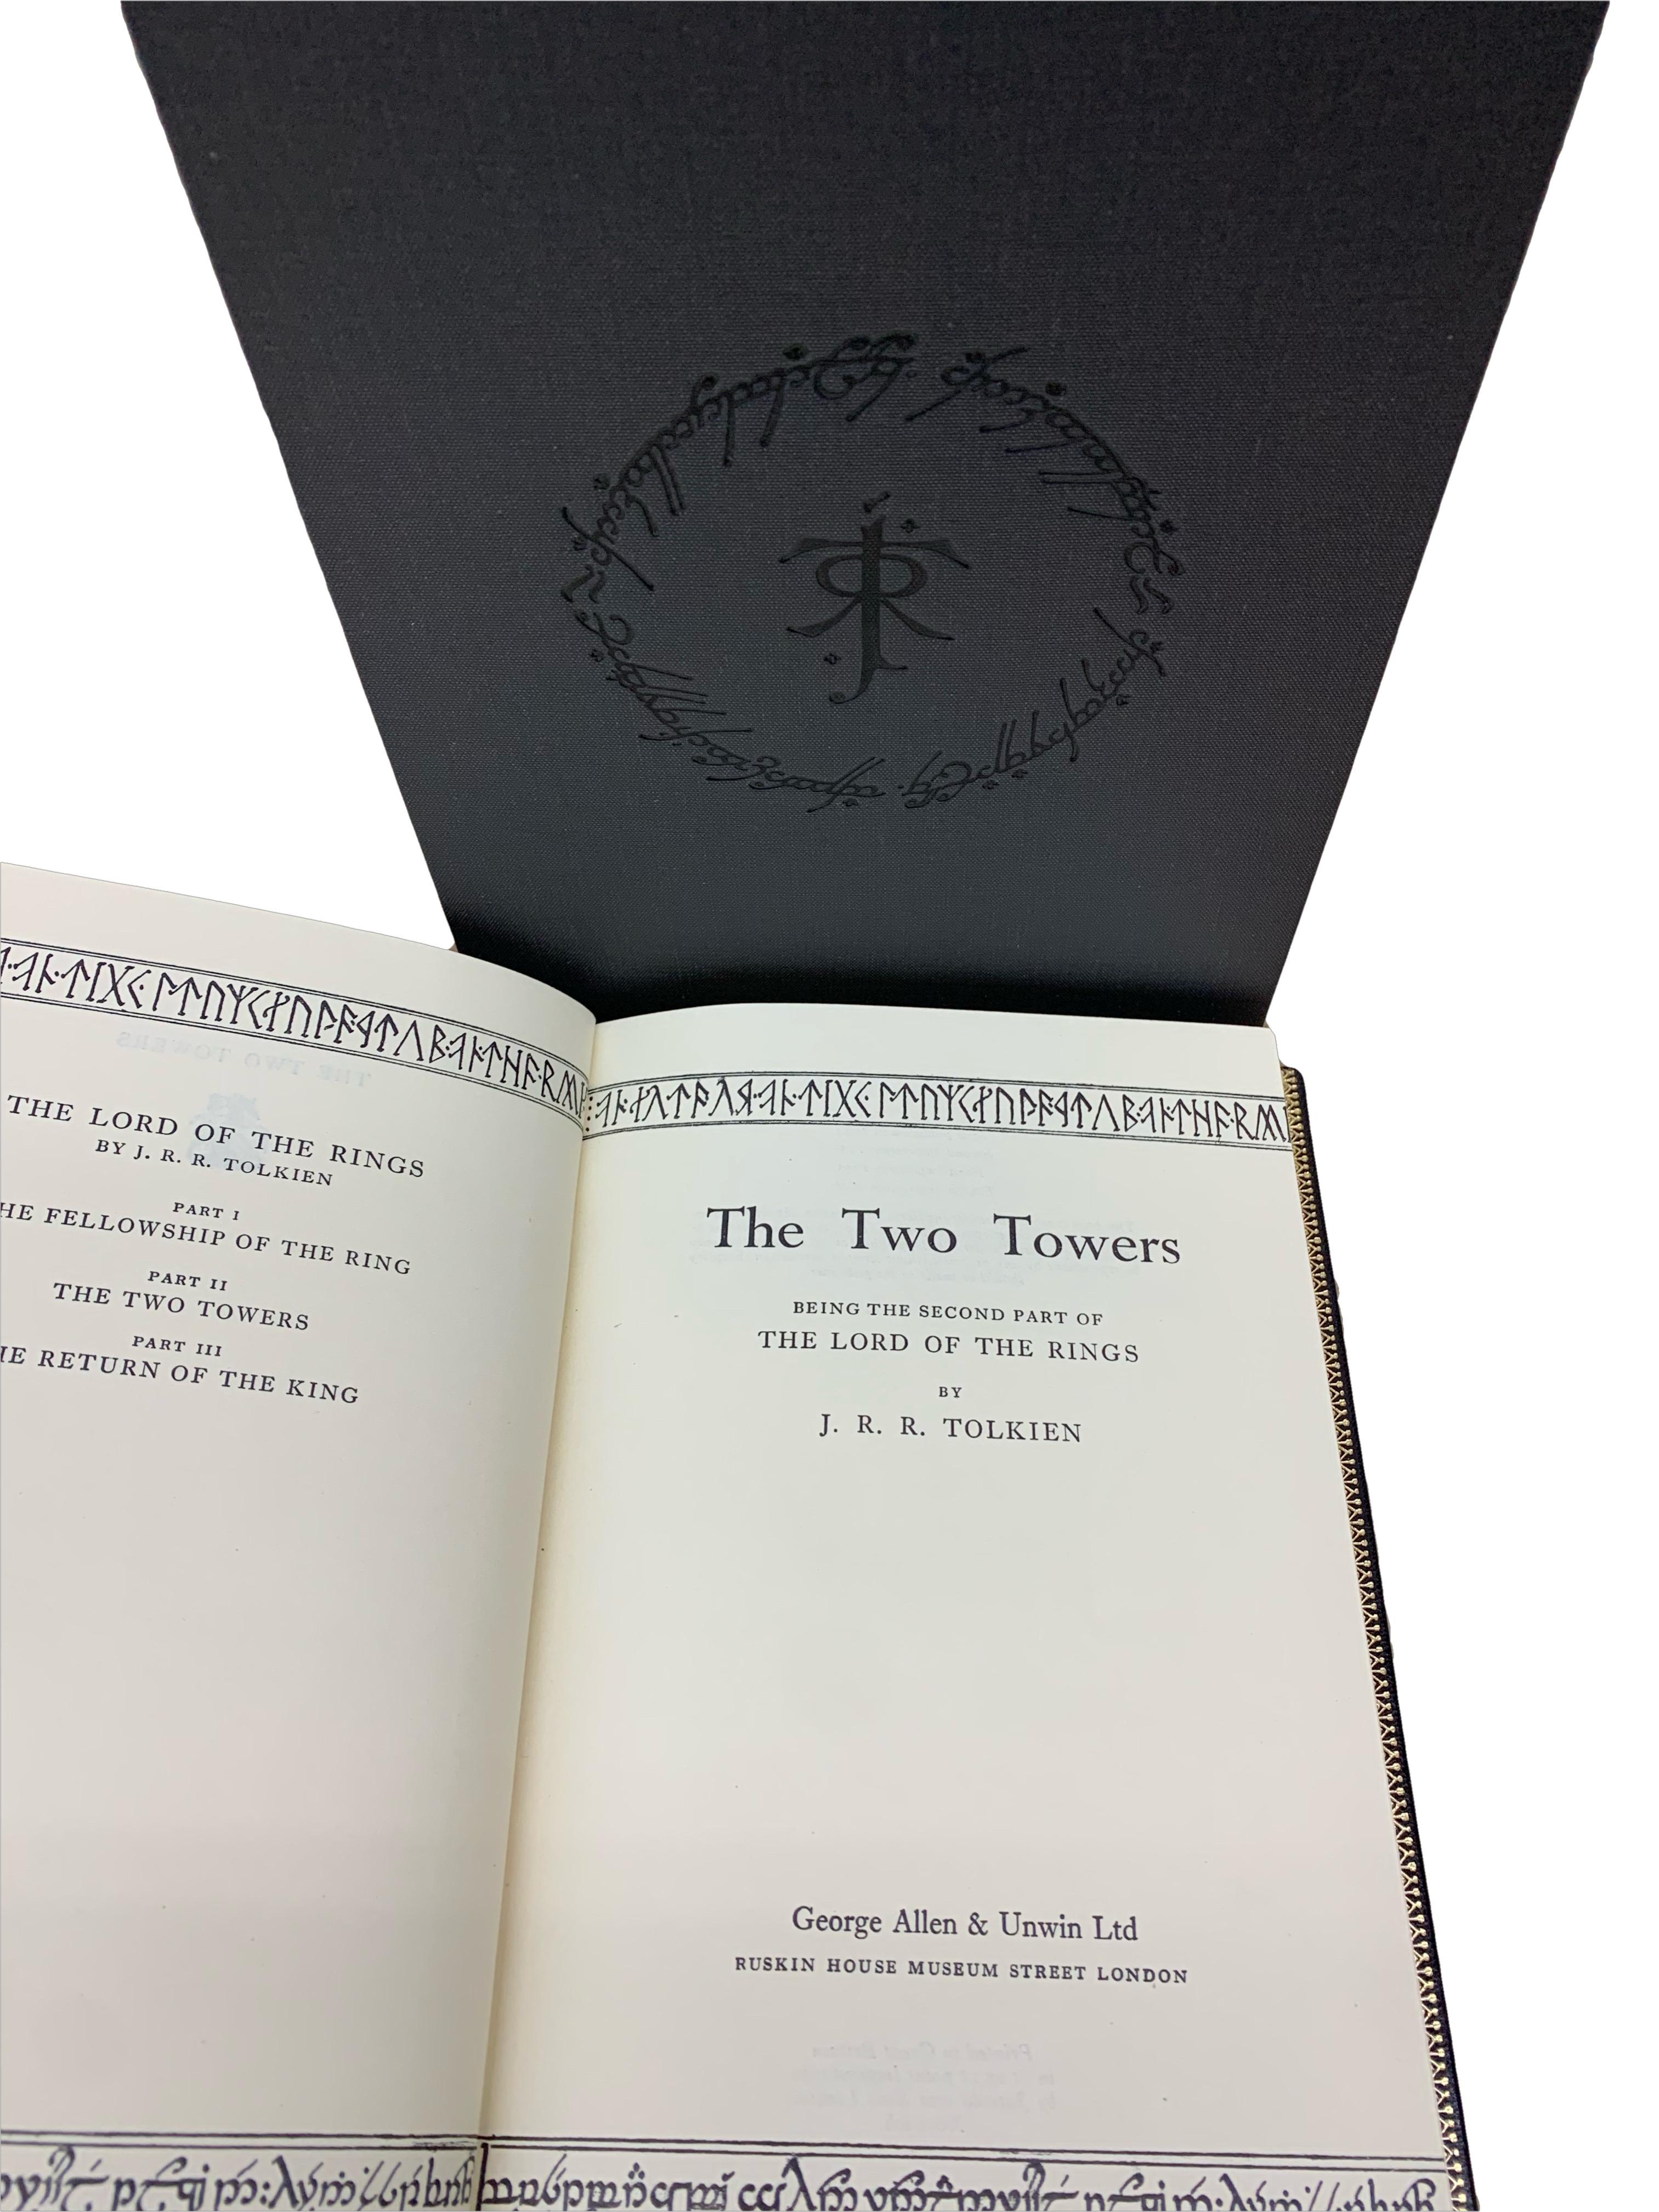 The Lord of the Rings Trilogy by J.R.R. Tolkien, In Three Vol. Complete, 1955-56 8